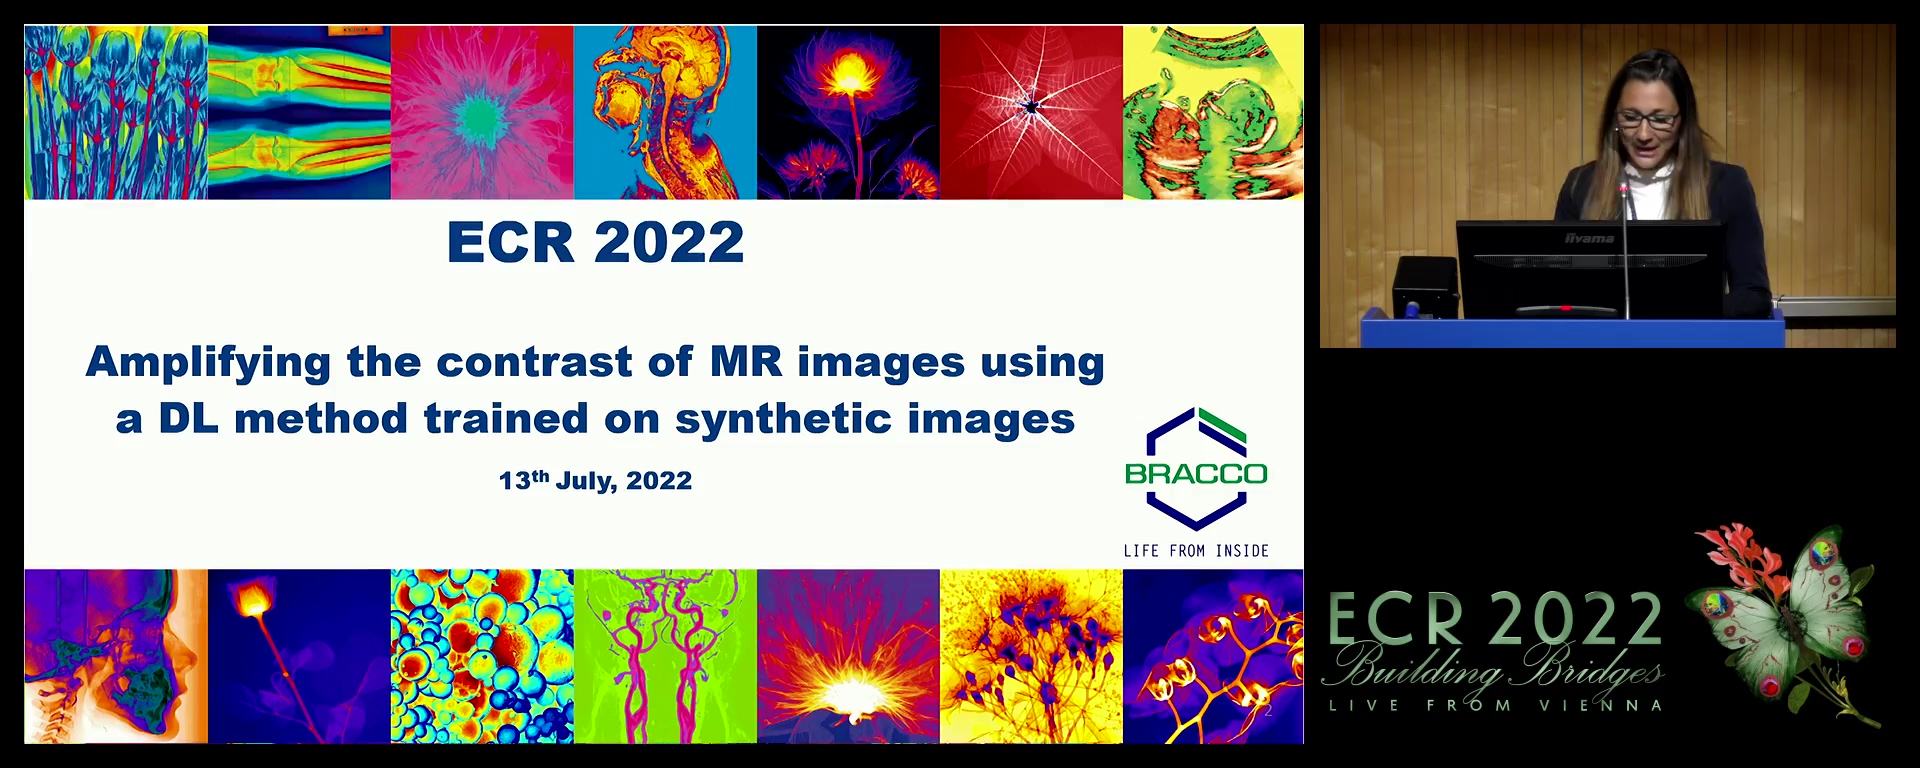 Amplifying the contrast of MR images using a DL method trained on synthetic images